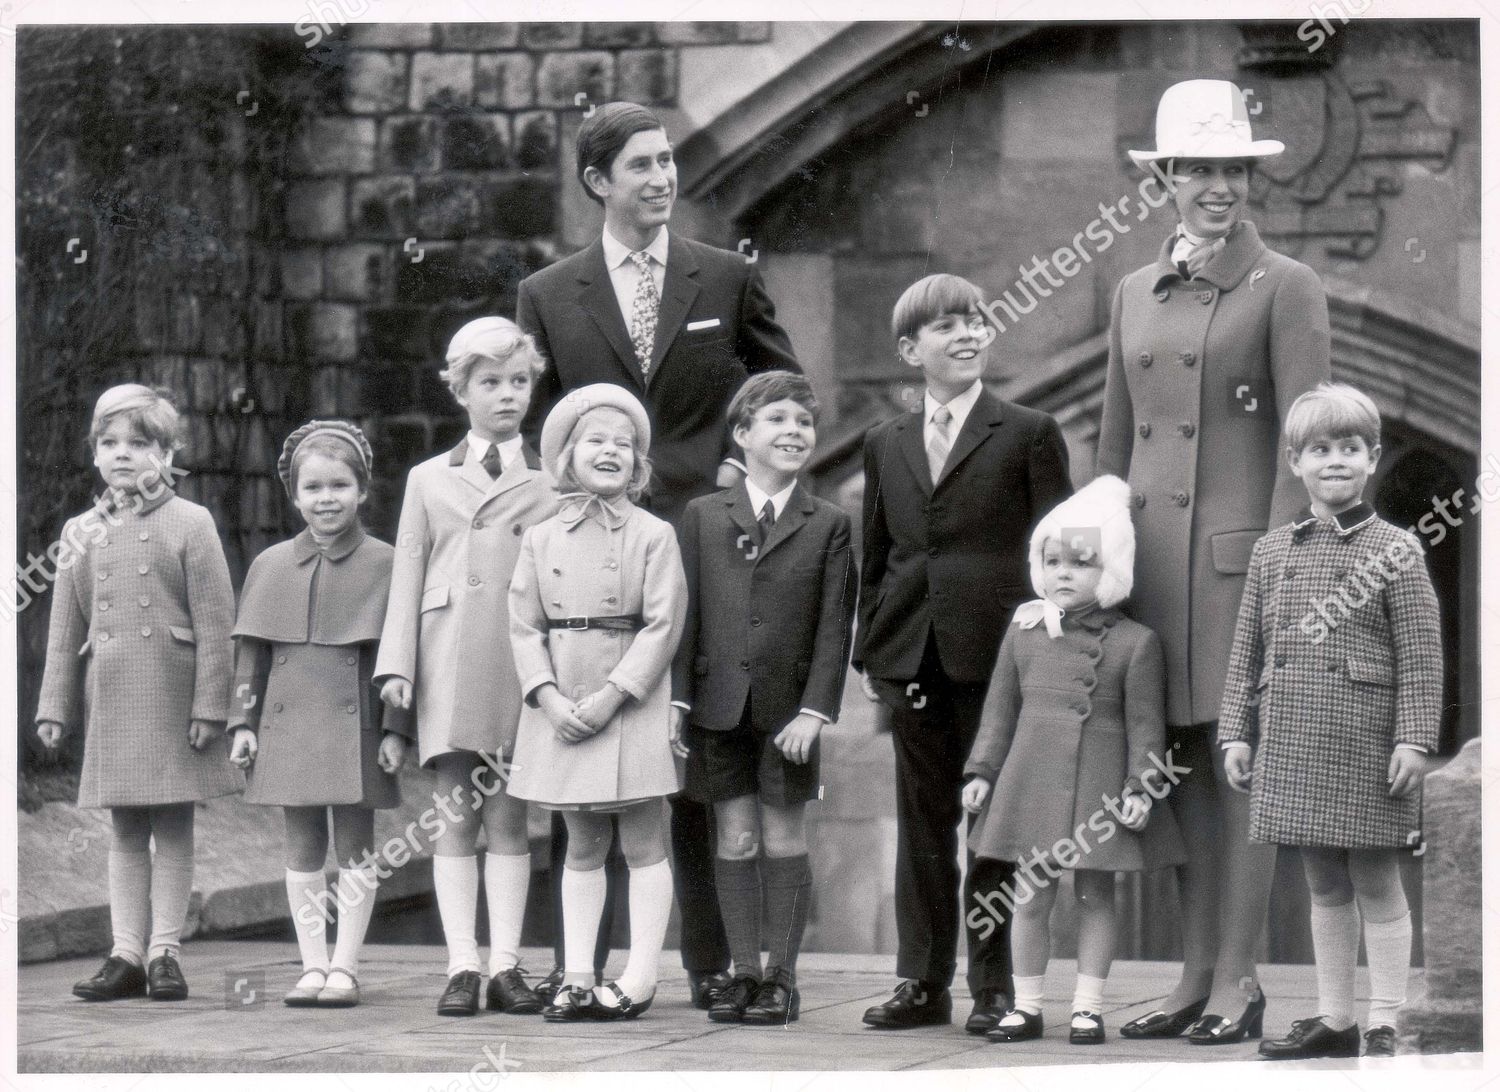 prince-of-wales-princess-royal-with-younger-royals-december-1969-christmas-day-at-windsor-castle-photographed-together-for-the-first-time-are-the-ten-royal-children-pictured-on-the-east-terrace-at-windsor-castle-o-christmas-day-after-the-morning-shutterstock-editorial-899582a.jpg